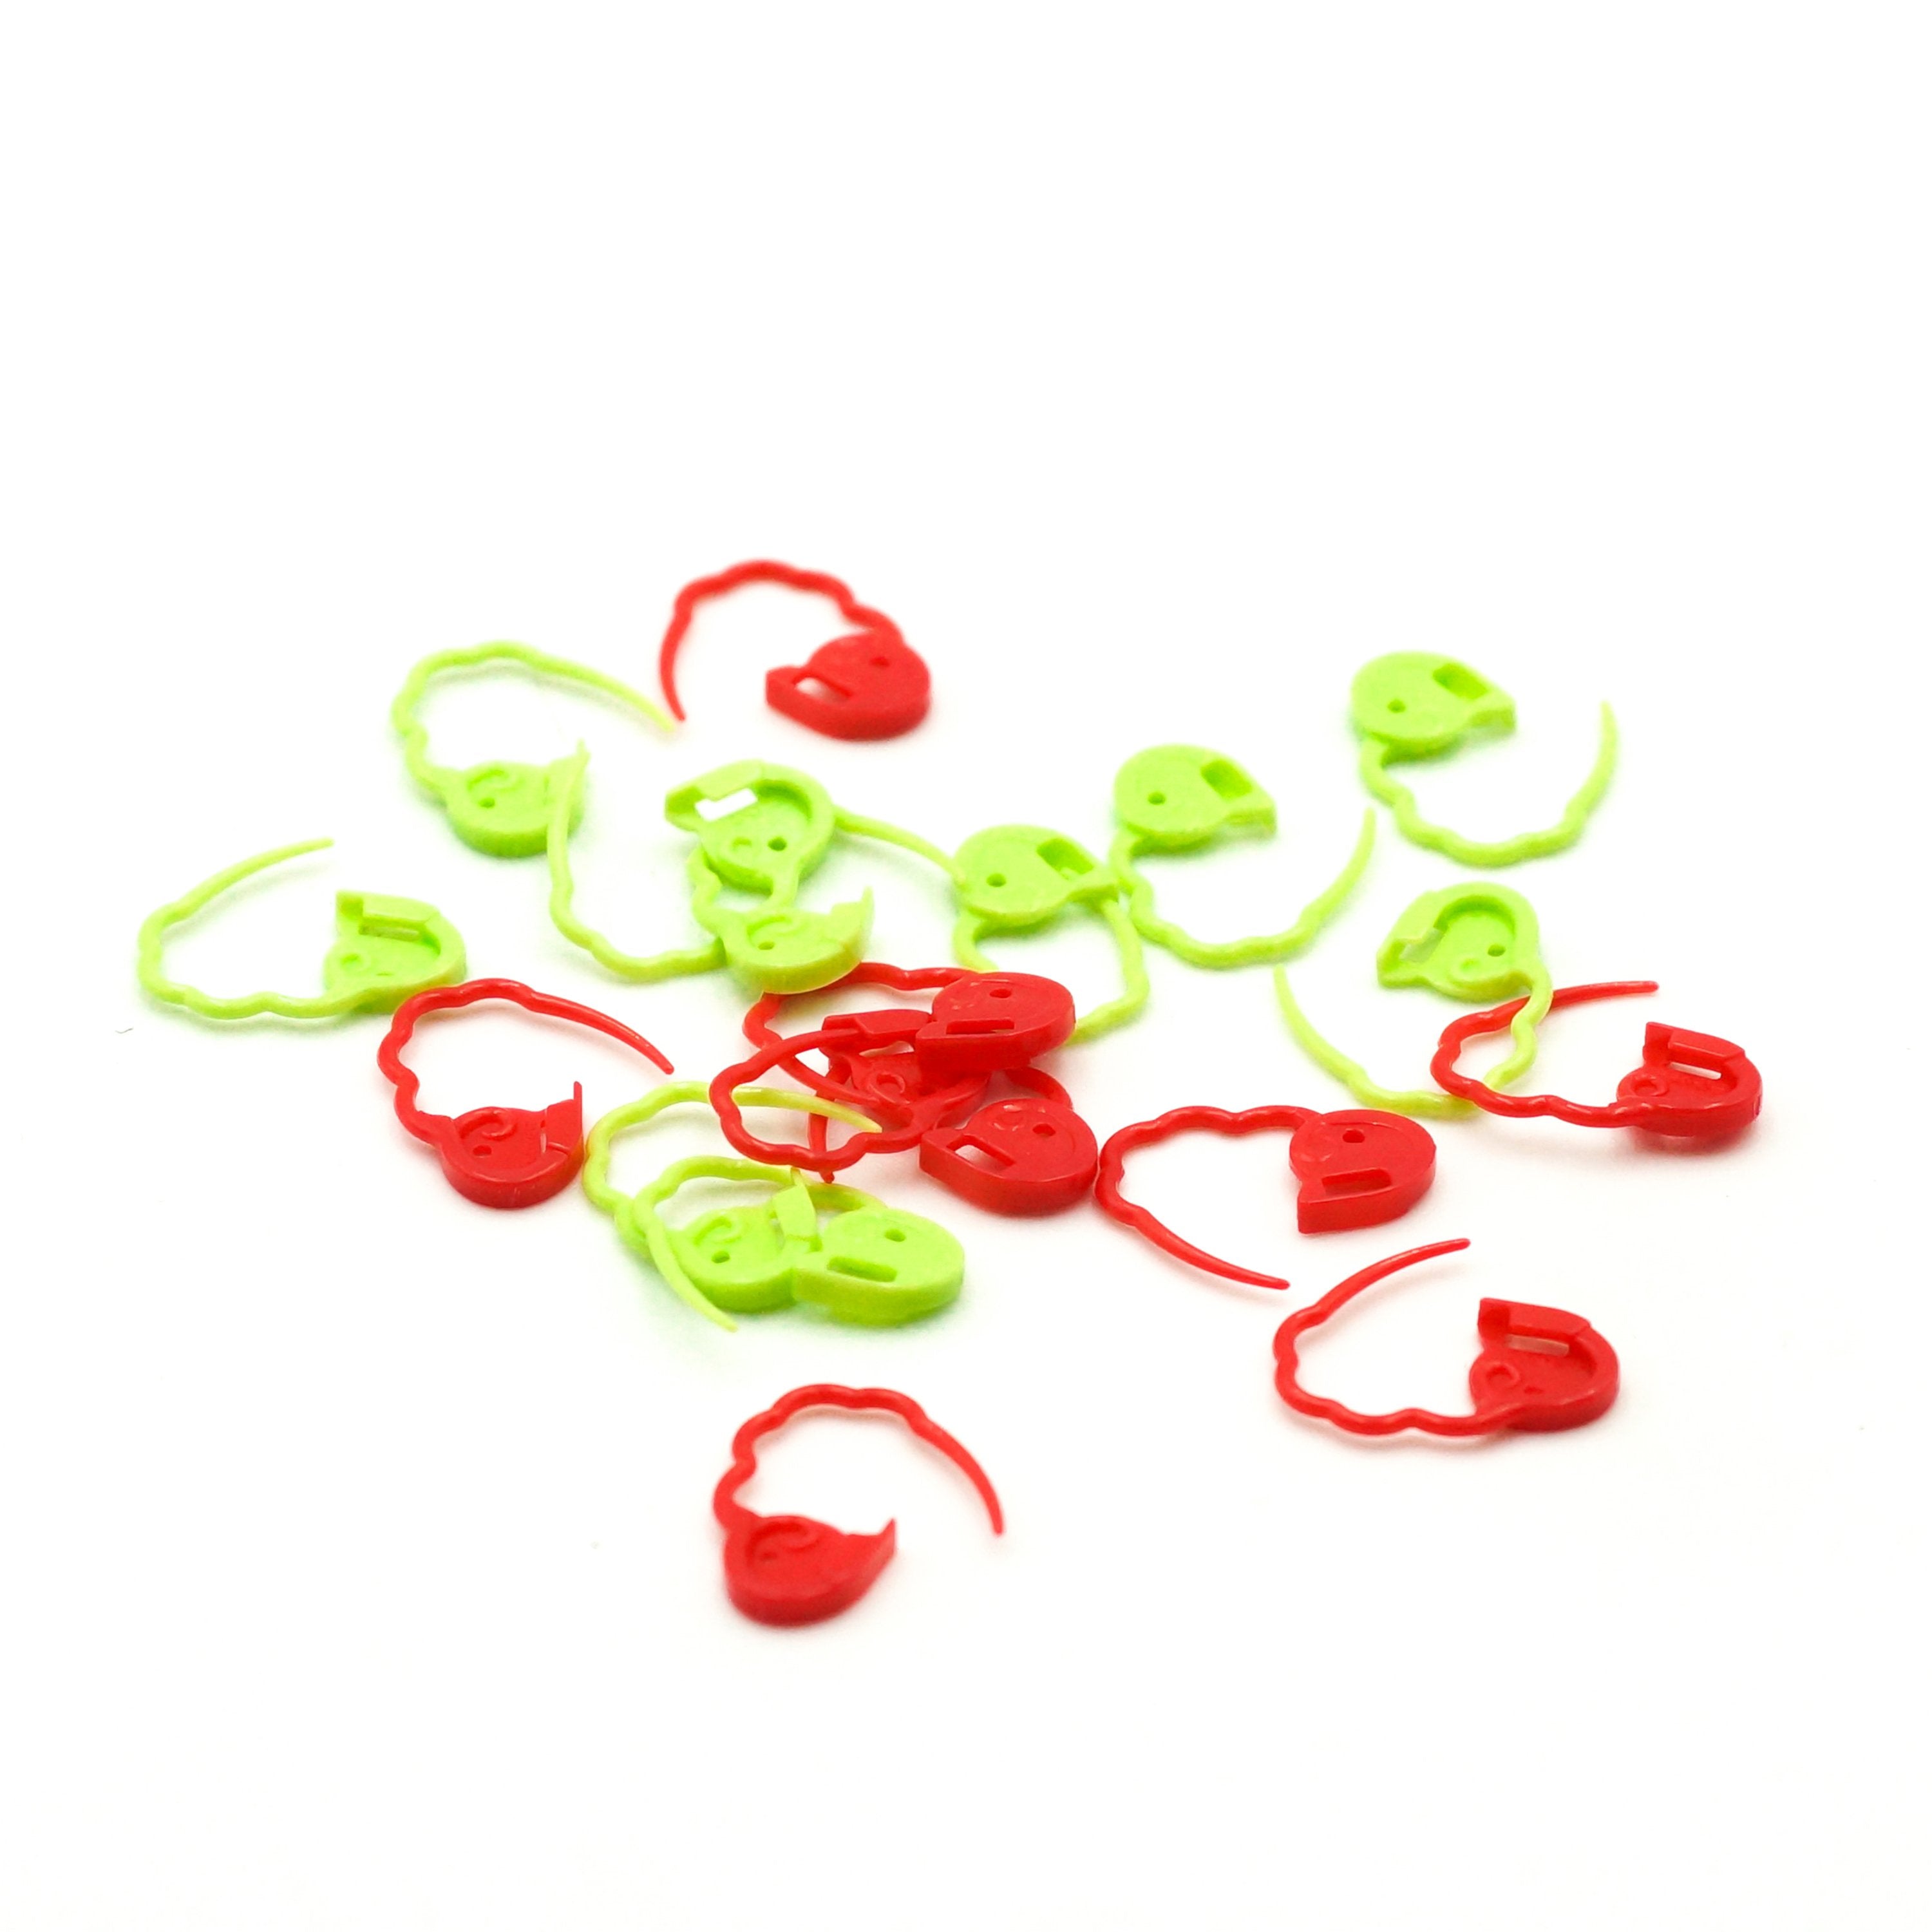 Clover Quick Locking Stitch Markers - Small